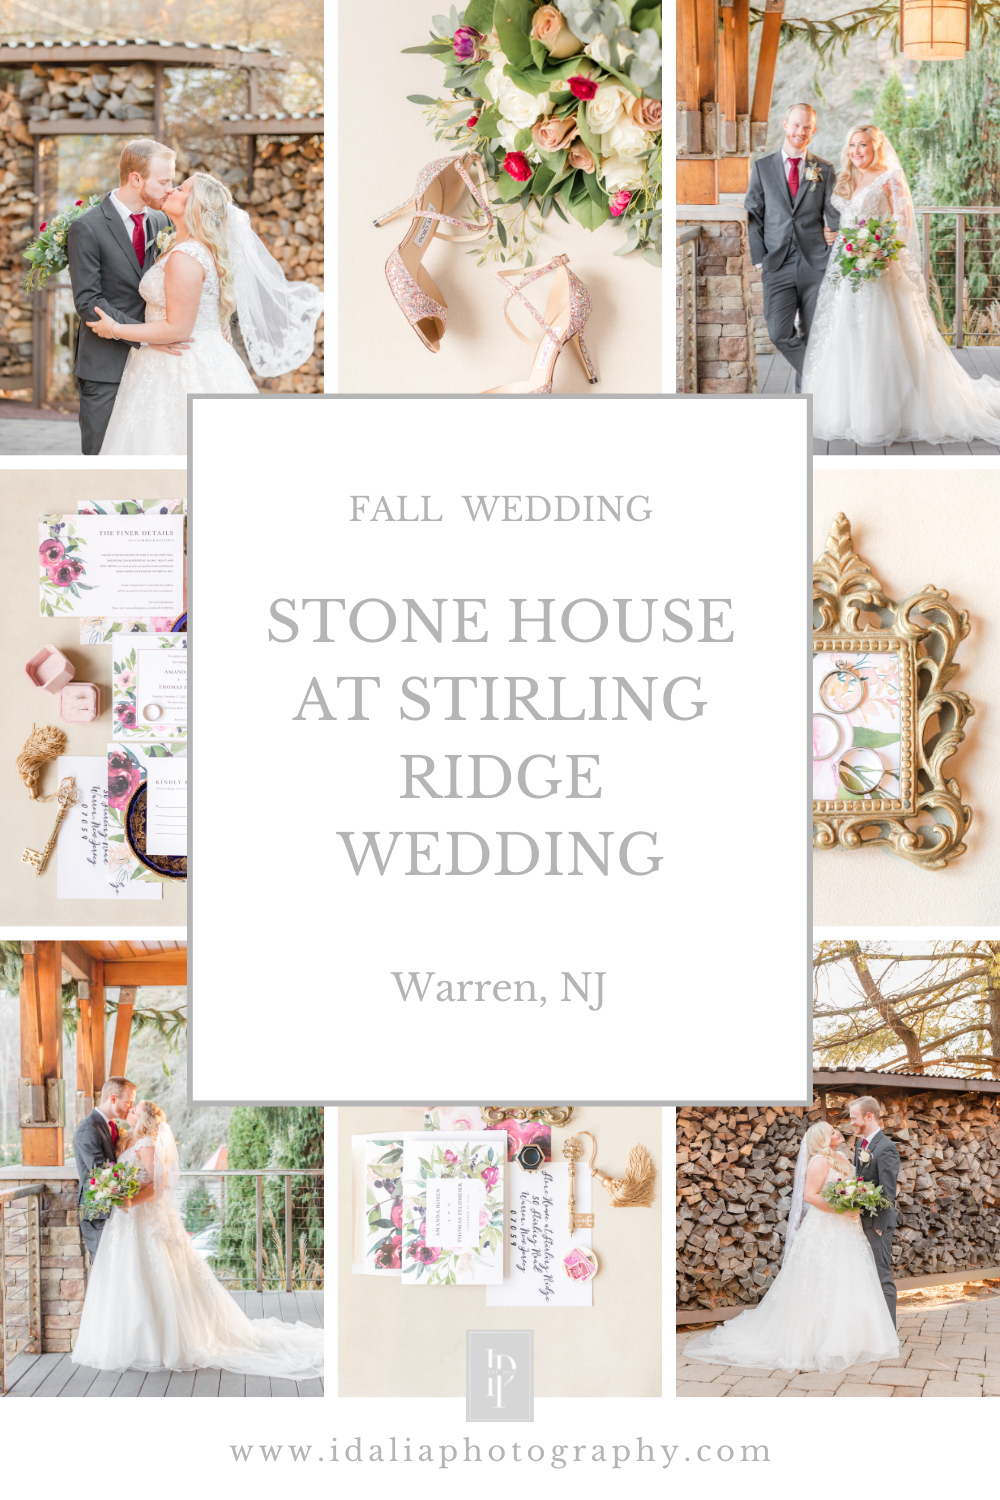 Stone House at Stirling Ridge Wedding with burgundy details in the fall photographed by NJ wedding photographer Idalia Photography